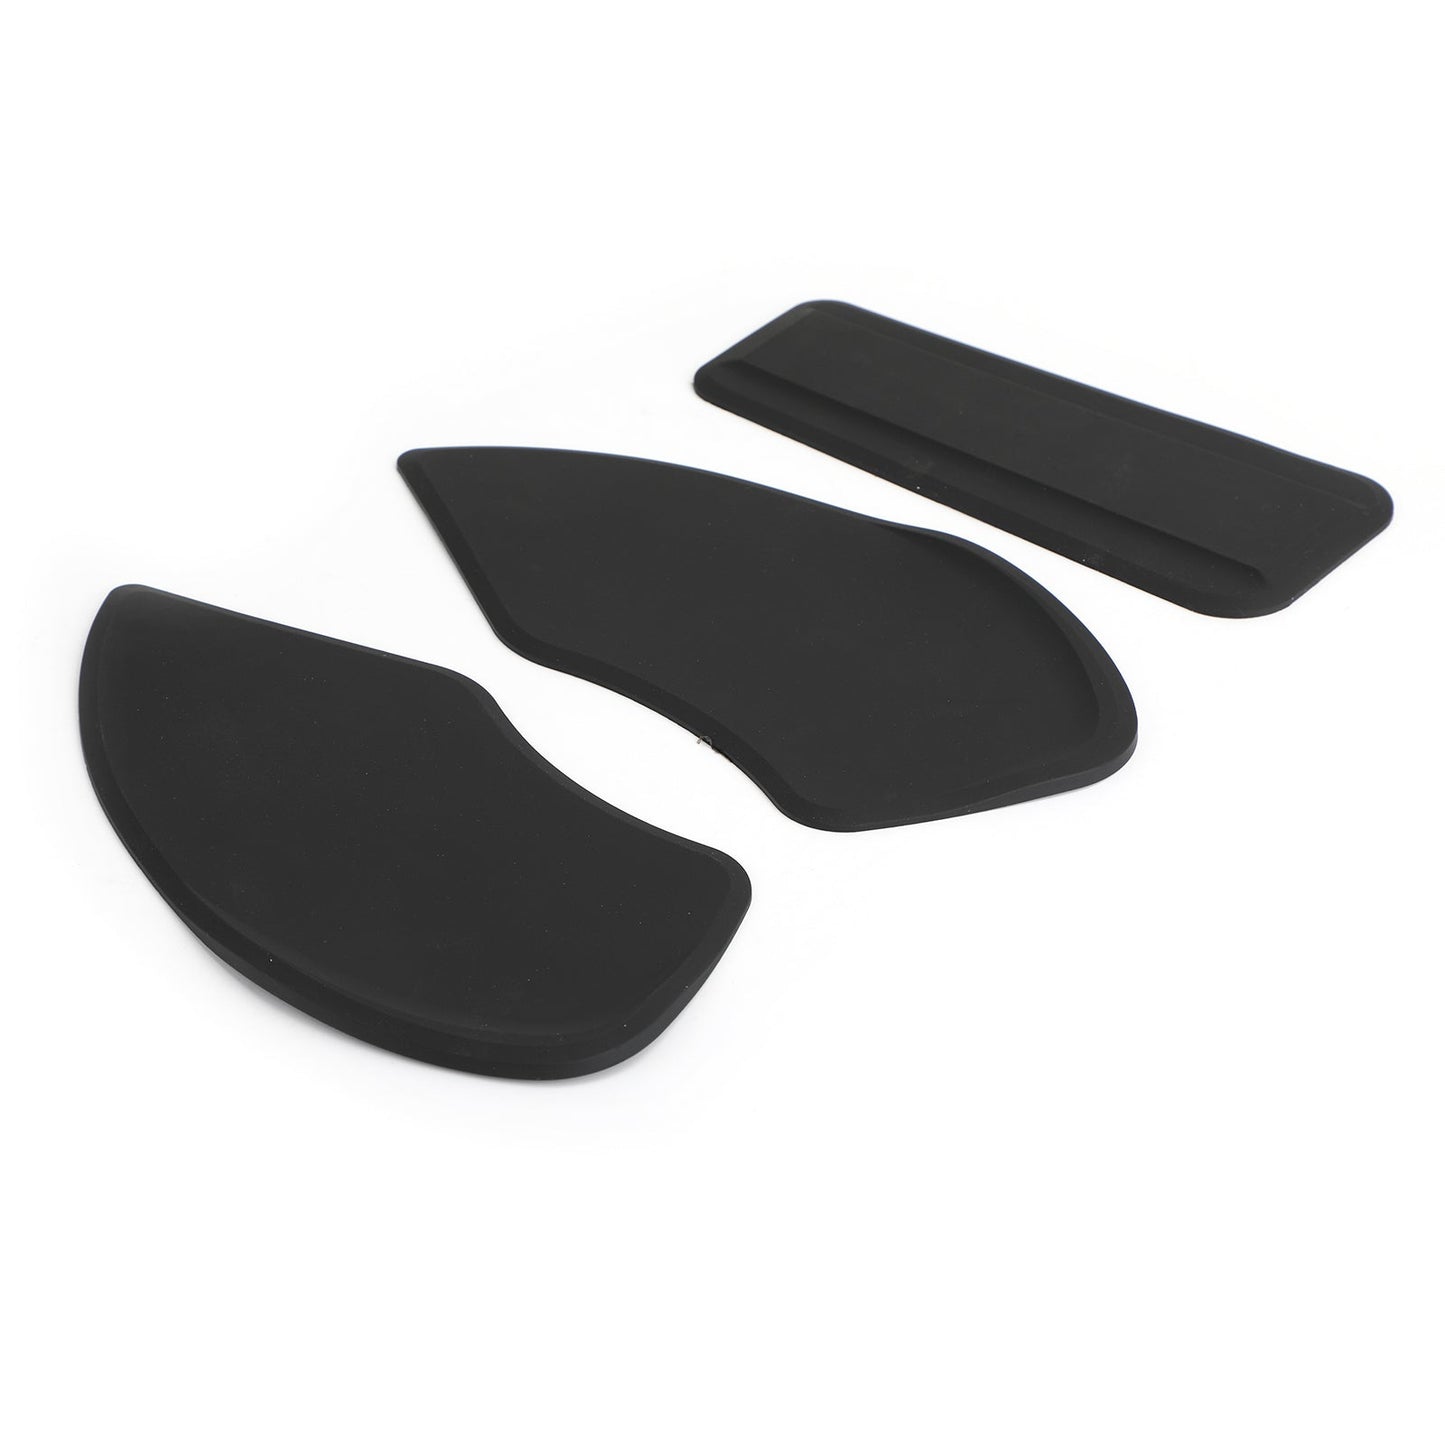 Paraserbatoio Traction Pads Protettore Ginocchiere Gas Laterale Per BMW R NINE T R9T 2014-2017 Generico